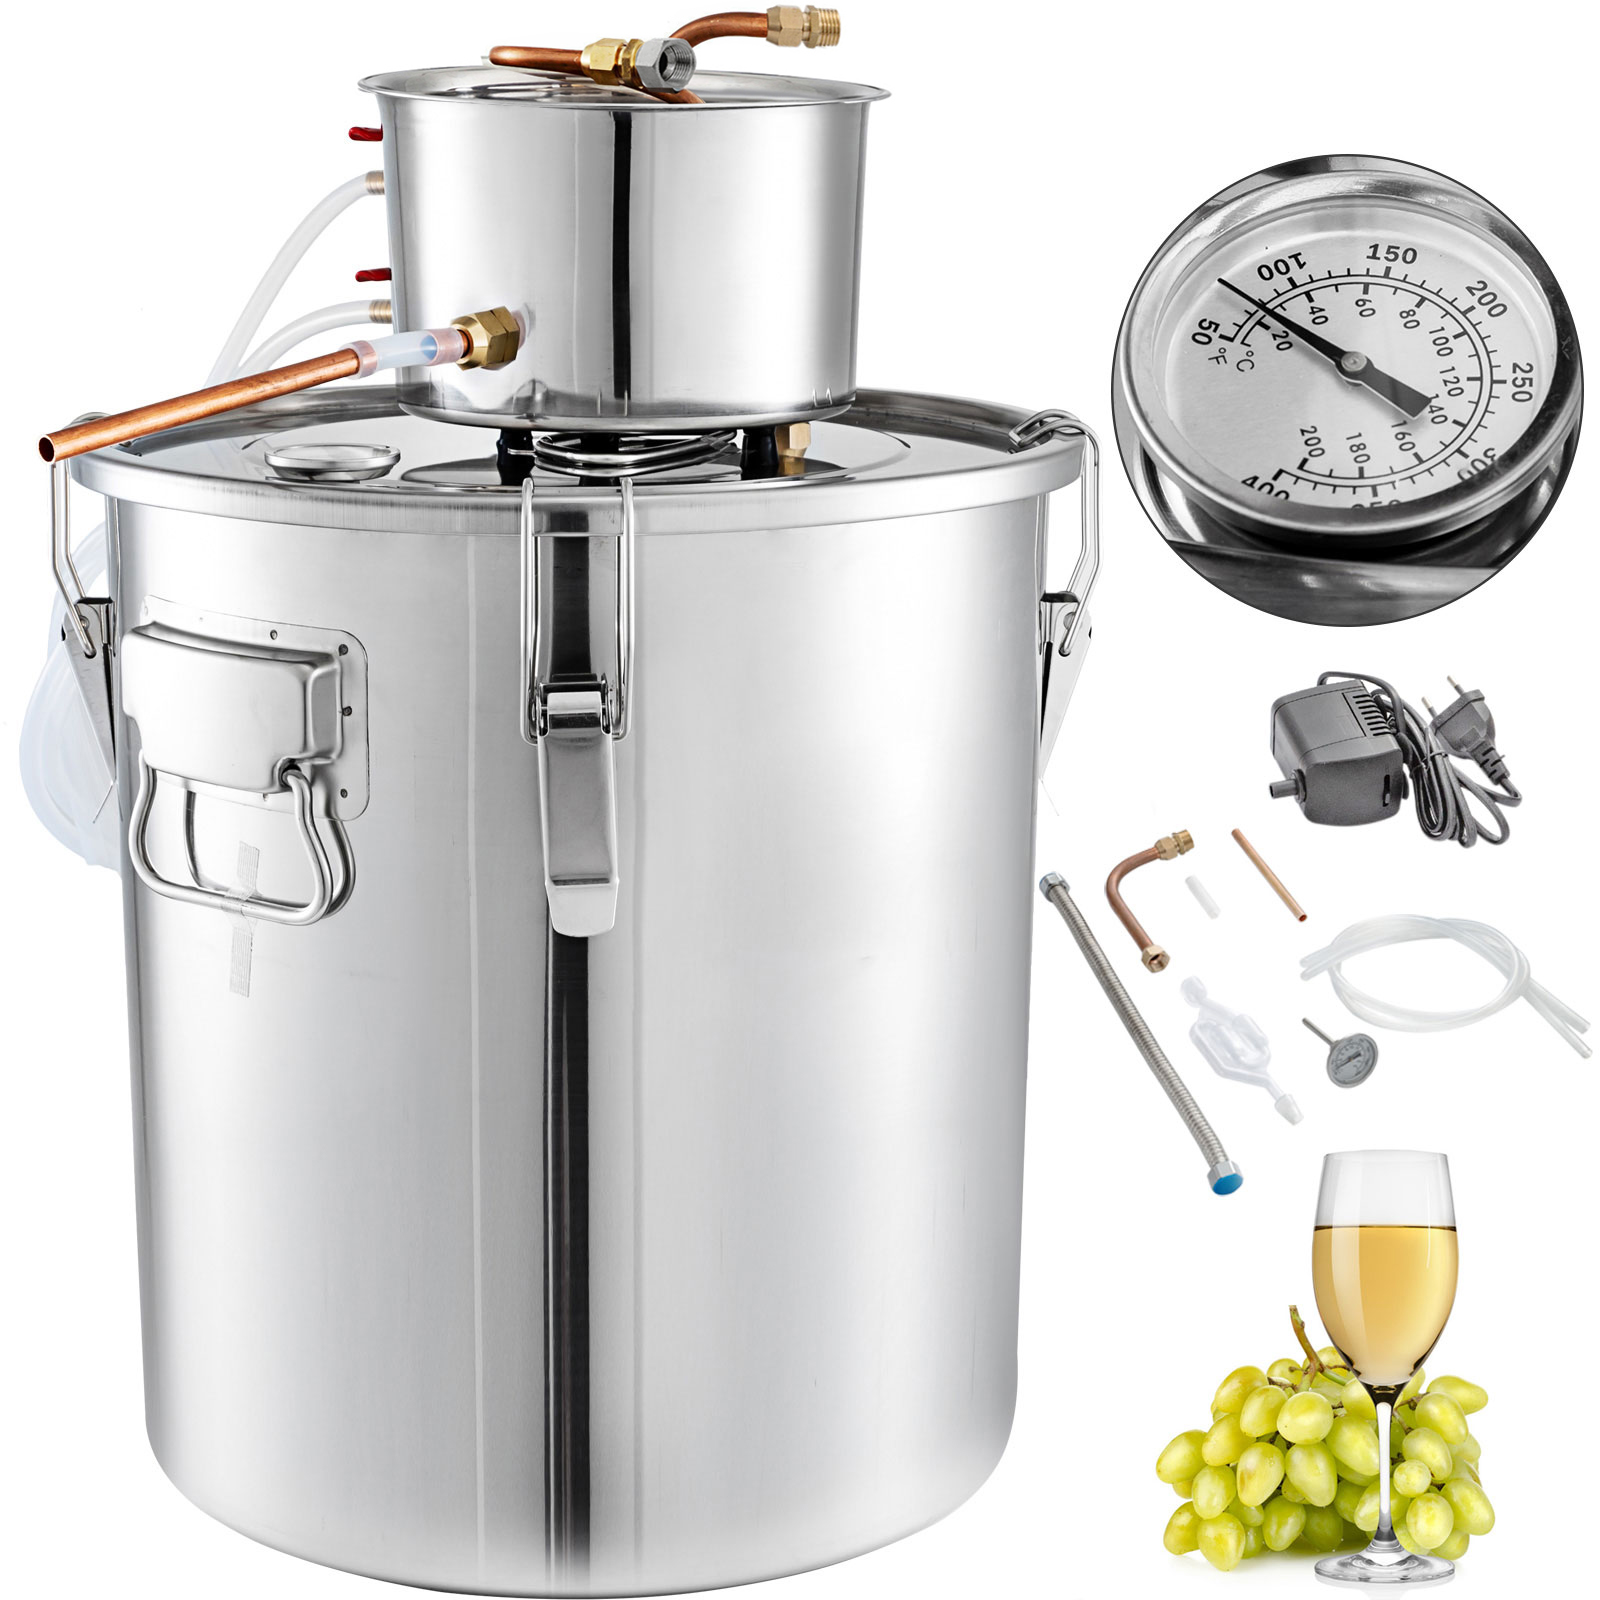 alcohol distillery kit, 3 gallons, with water pump